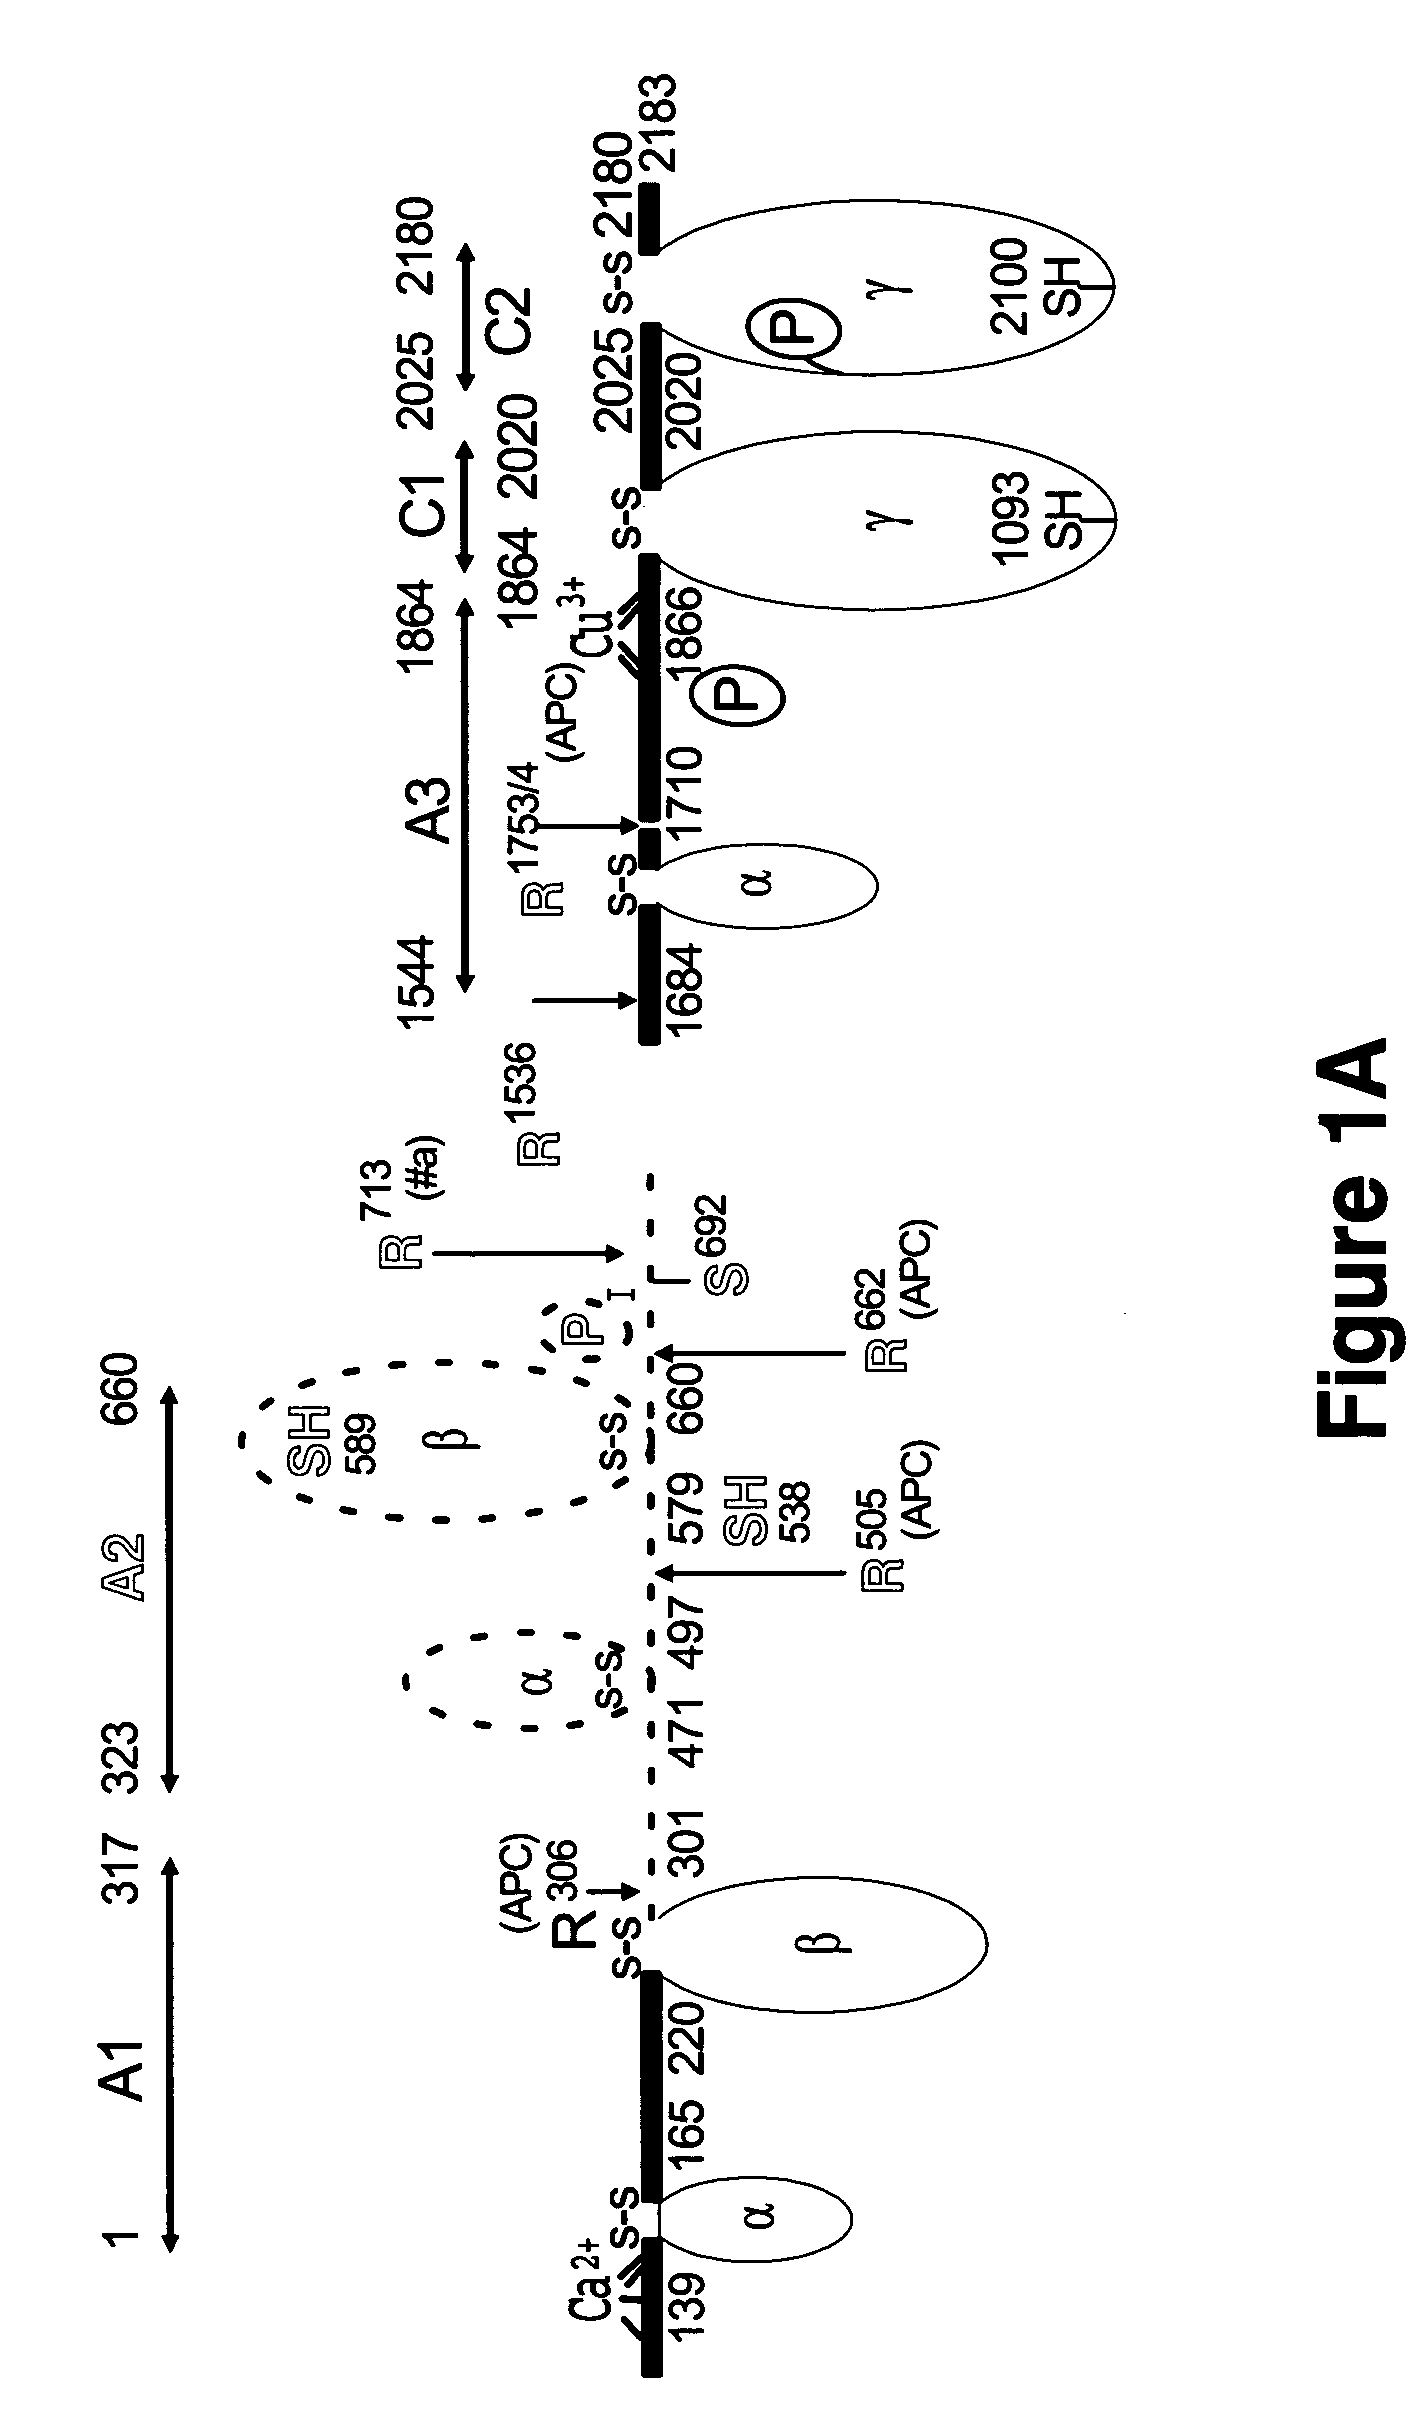 Crystal structure of factor Vai and method for identifying blood factor Va modulators